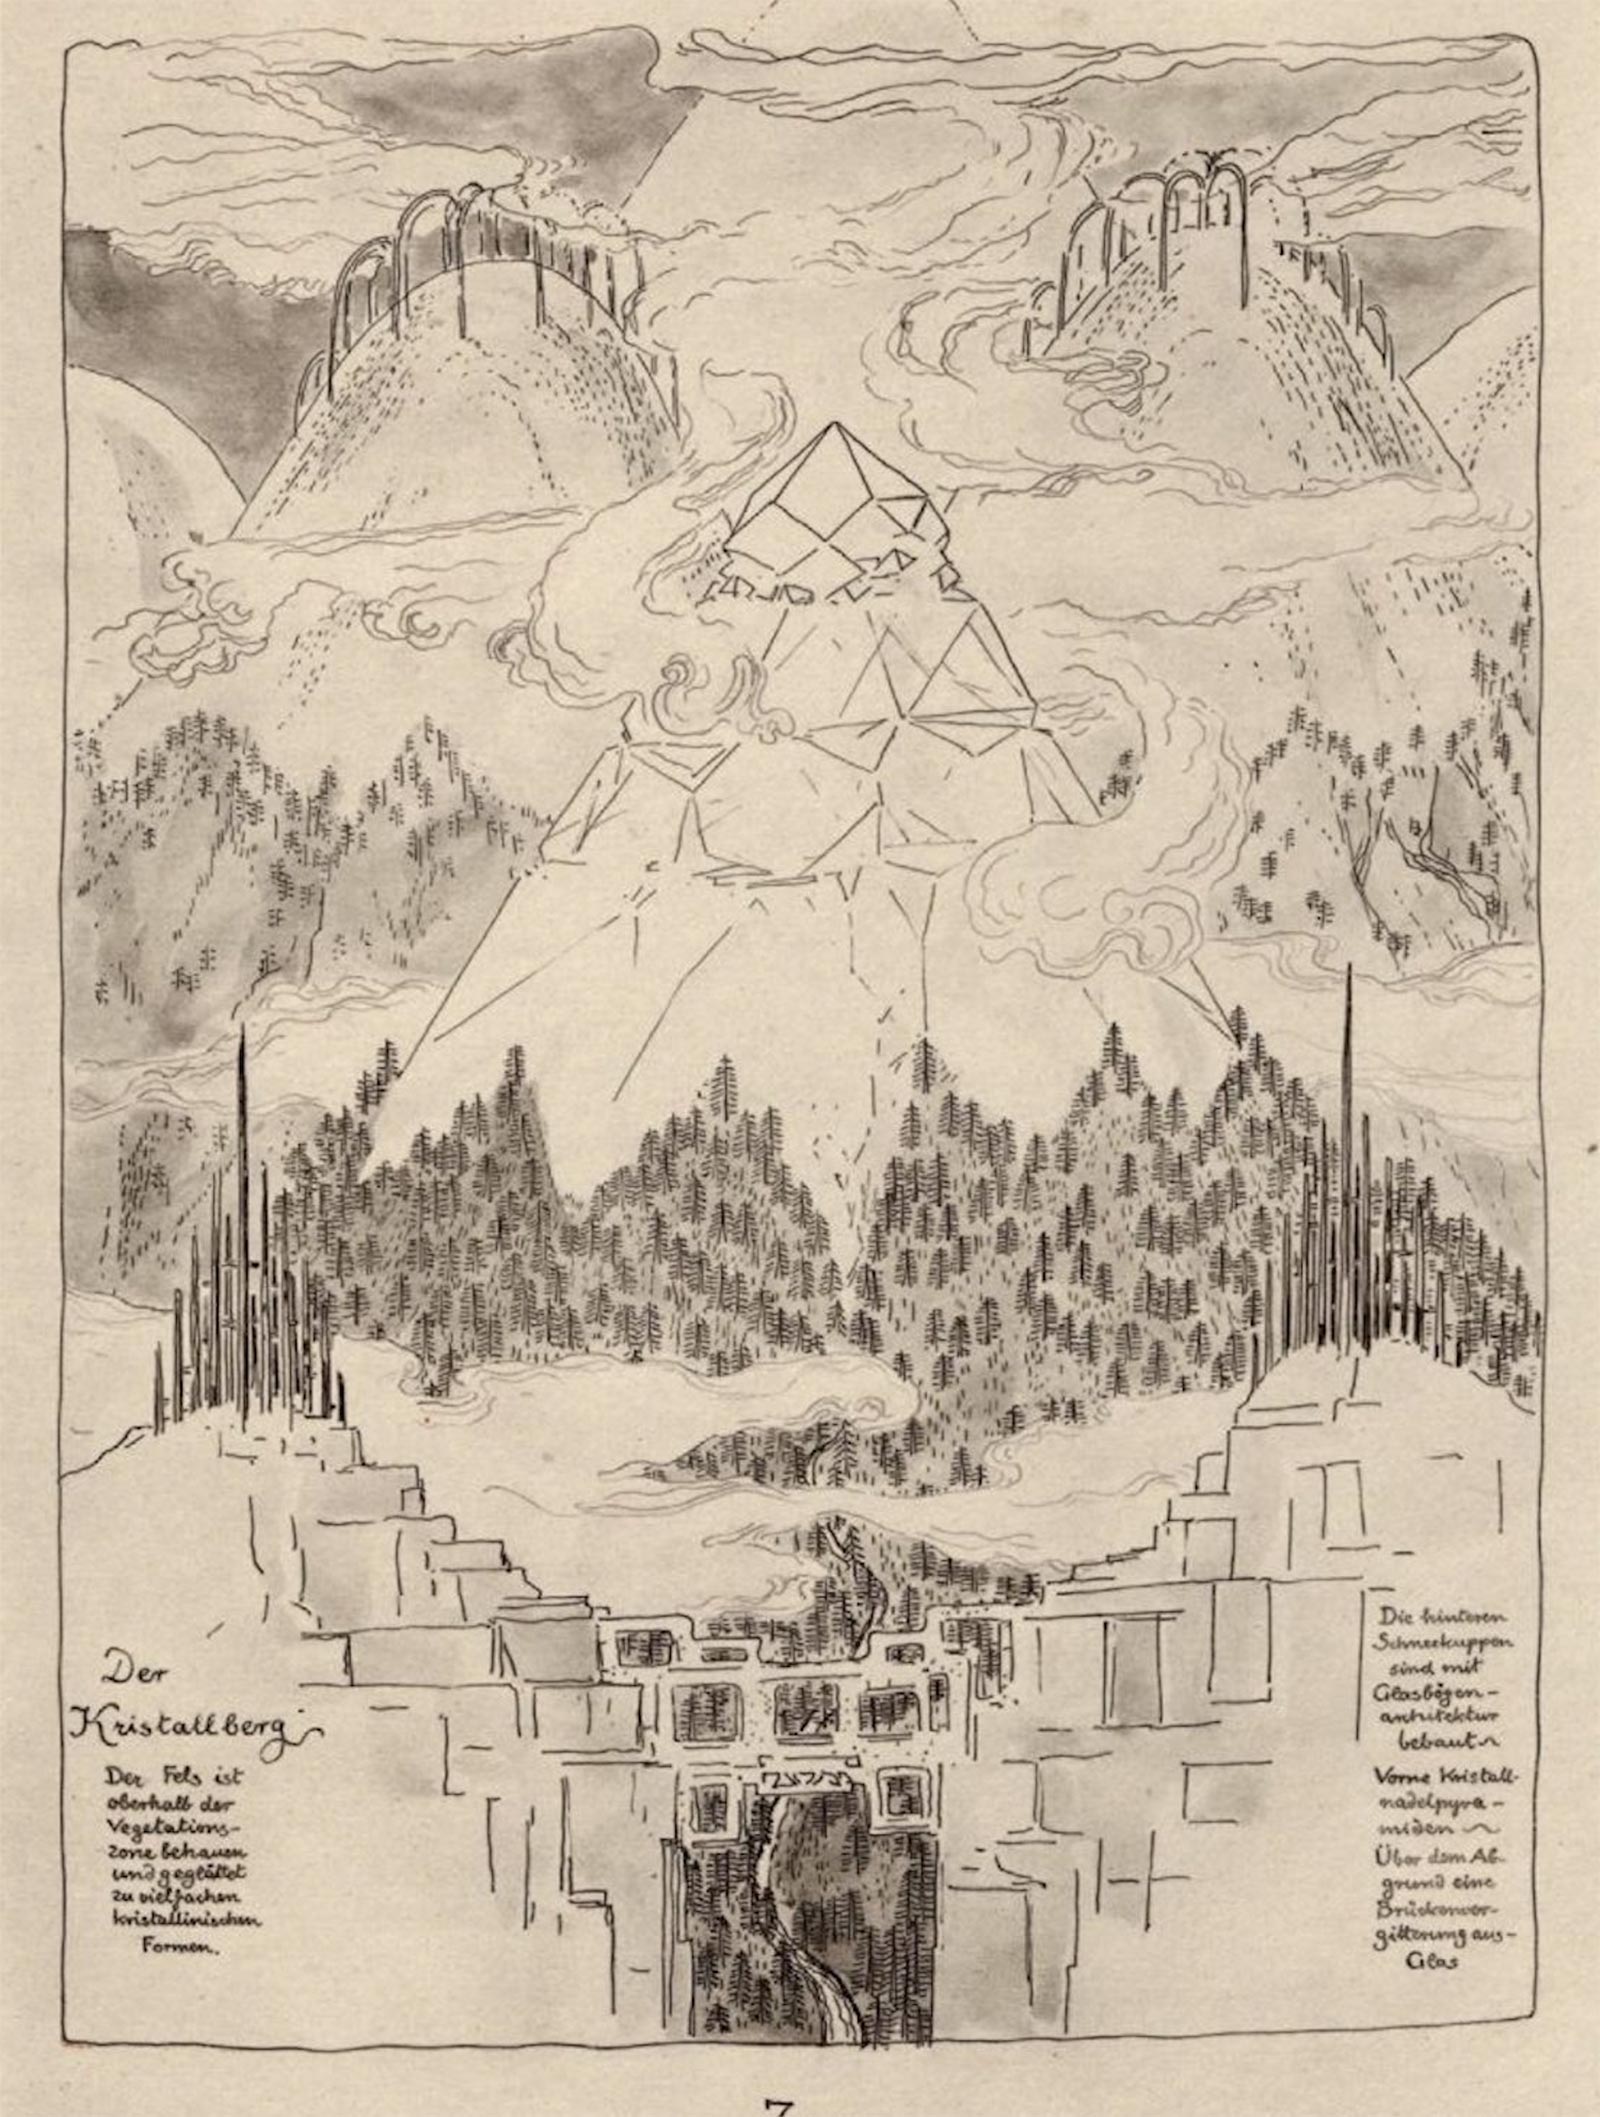 Plates from Bruno Taut’s Alpine Architecture, 1919. Above: “Der Kristallberg” (The Crystal Mountain). Below: “Tal als Blüte” (Valley as Flower).